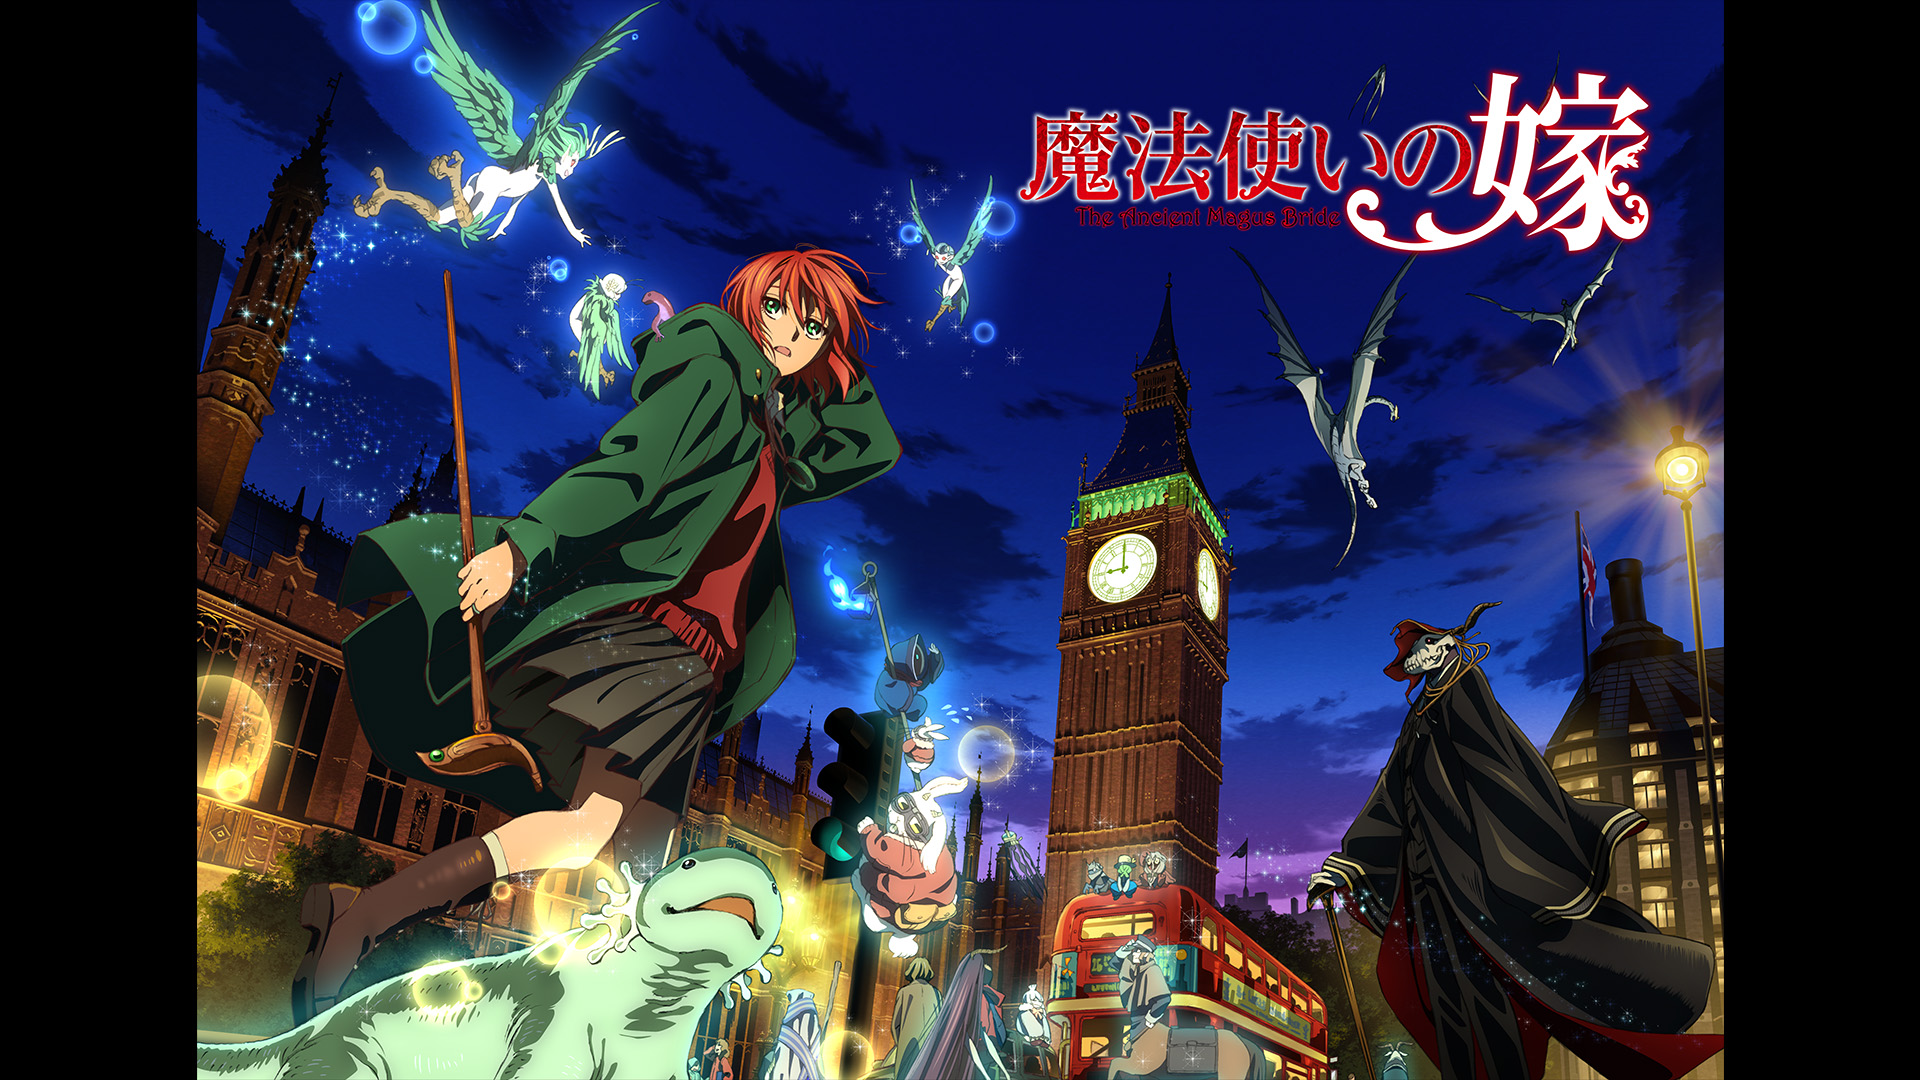 The Ancient Magus Bride season 2 premieres this spring